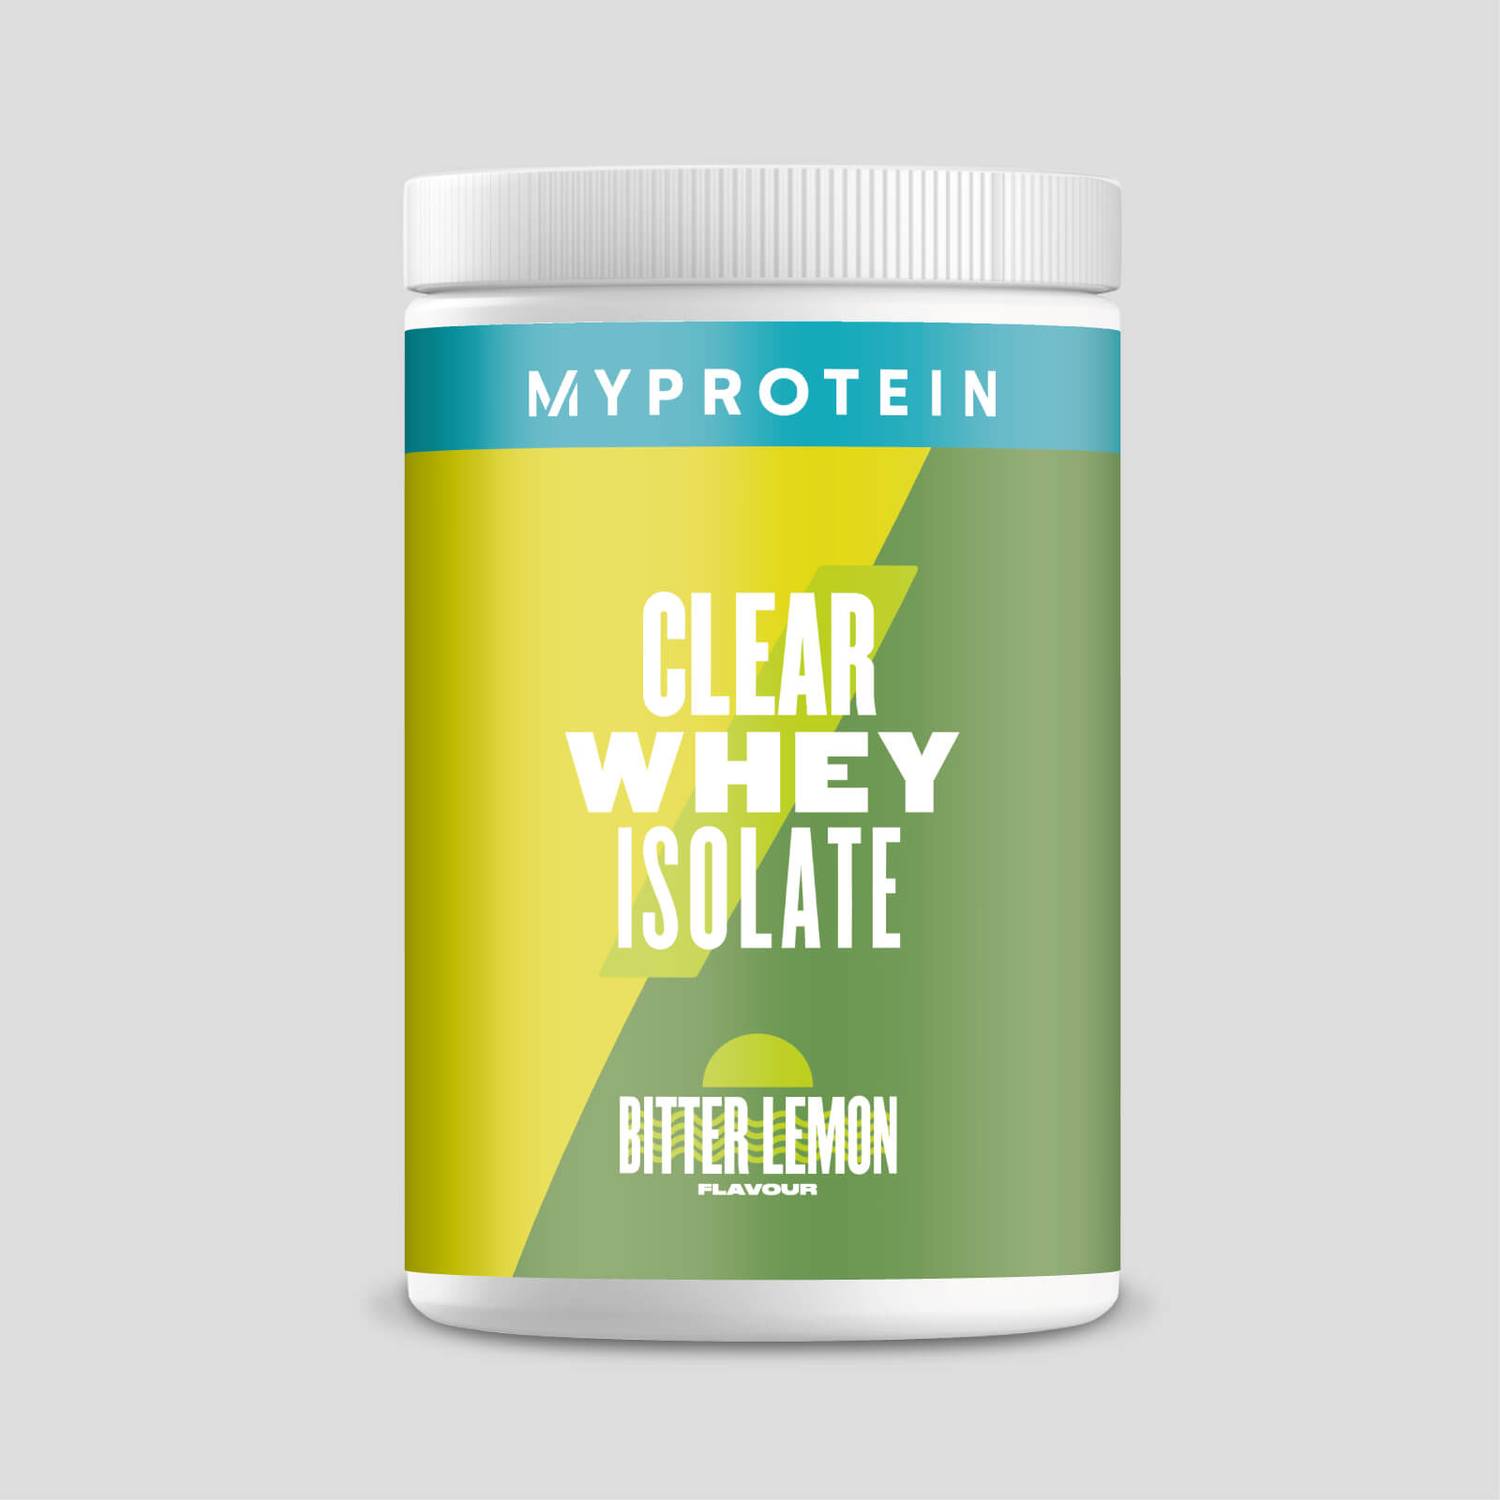 MyProtein Clear Whey Isolate - 20 Servings